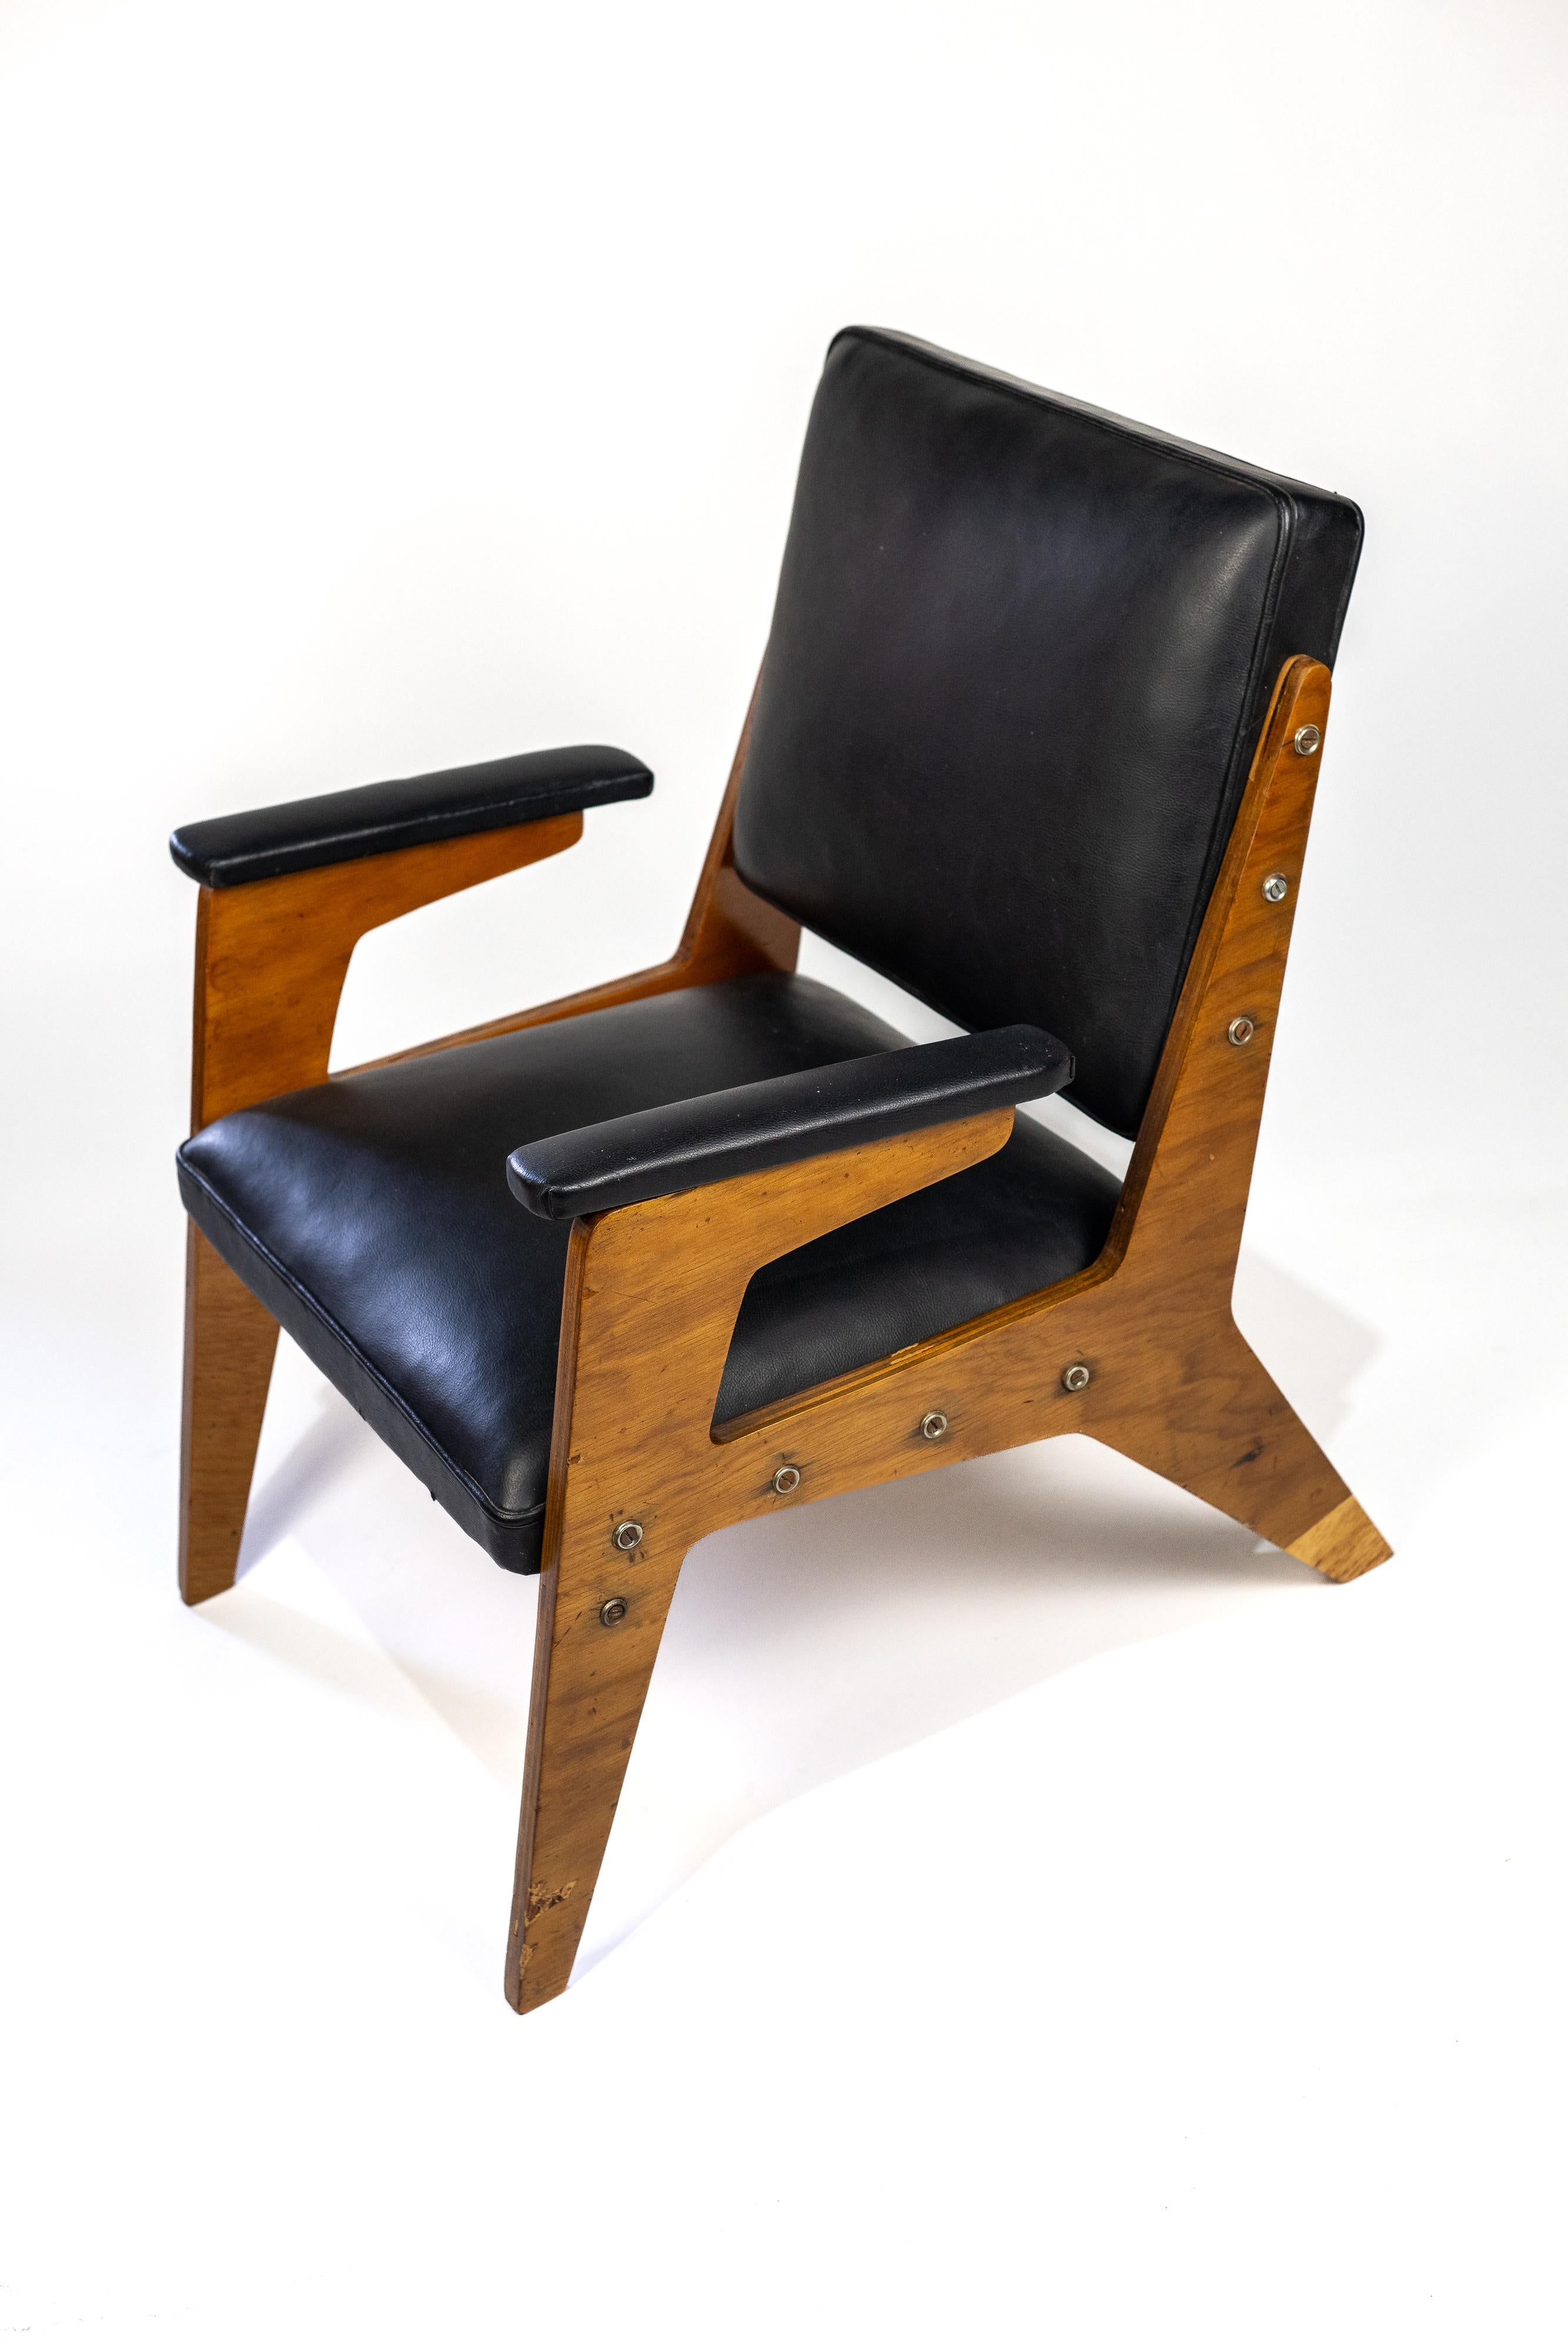 Hand-Crafted José Zanine Caldas. Moveis Z armchair, c. 1950. Plywood Naval and curvin wedge. For Sale